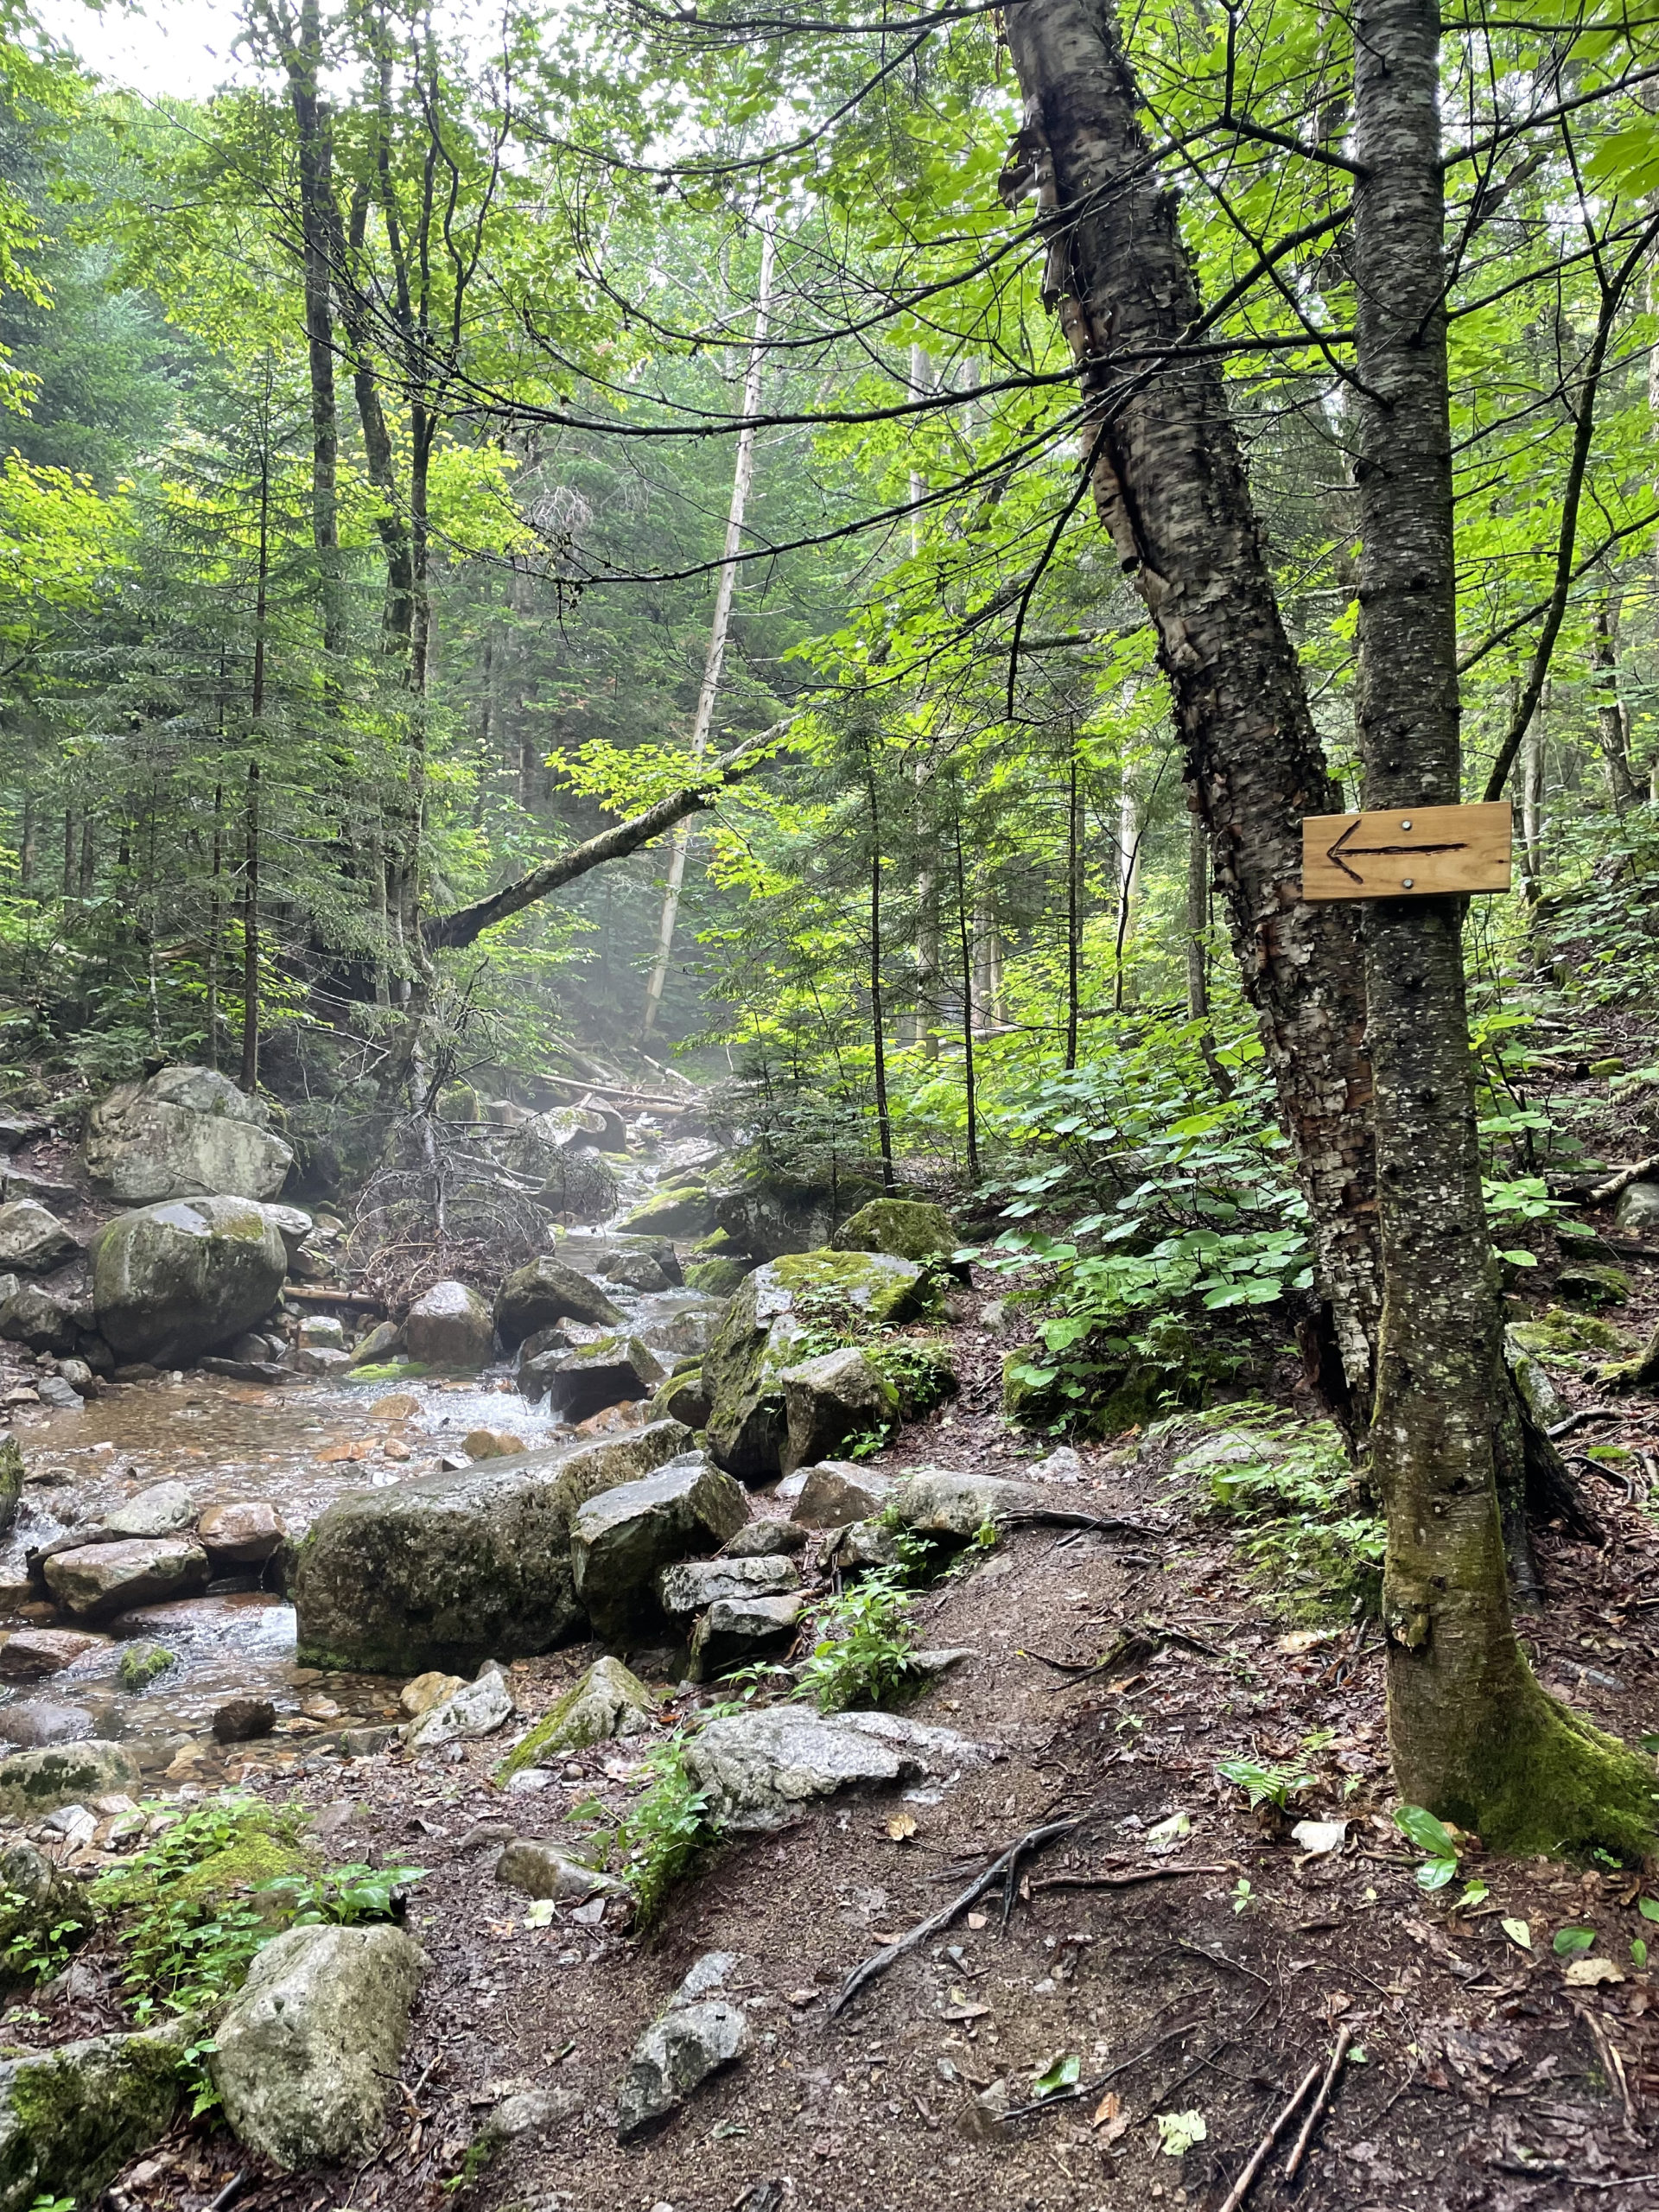 Trail sign, seen while hiking Mt. Liberty and Mt. Flume on the Flume Slide Trail in the White Mountain National Forest, New Hampshire